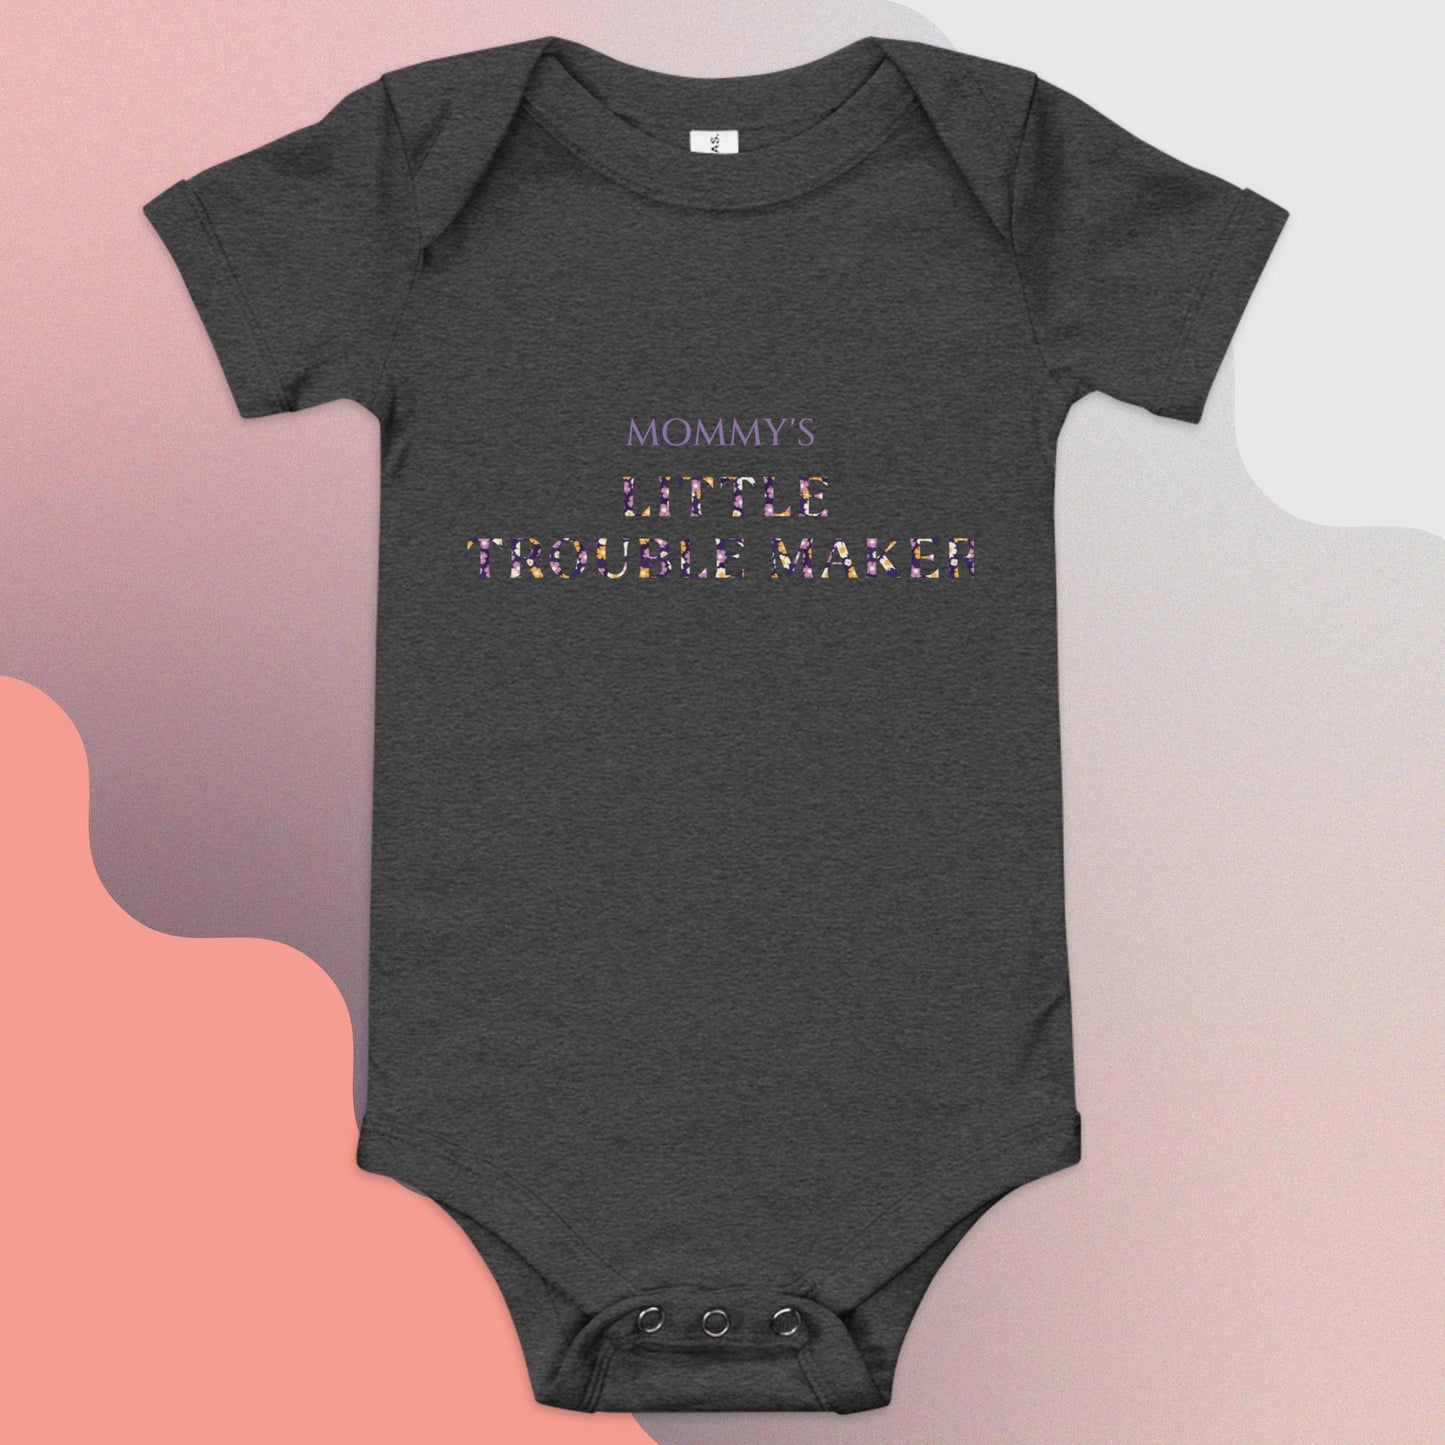 Mommy's little trouble maker Baby short sleeve one piece